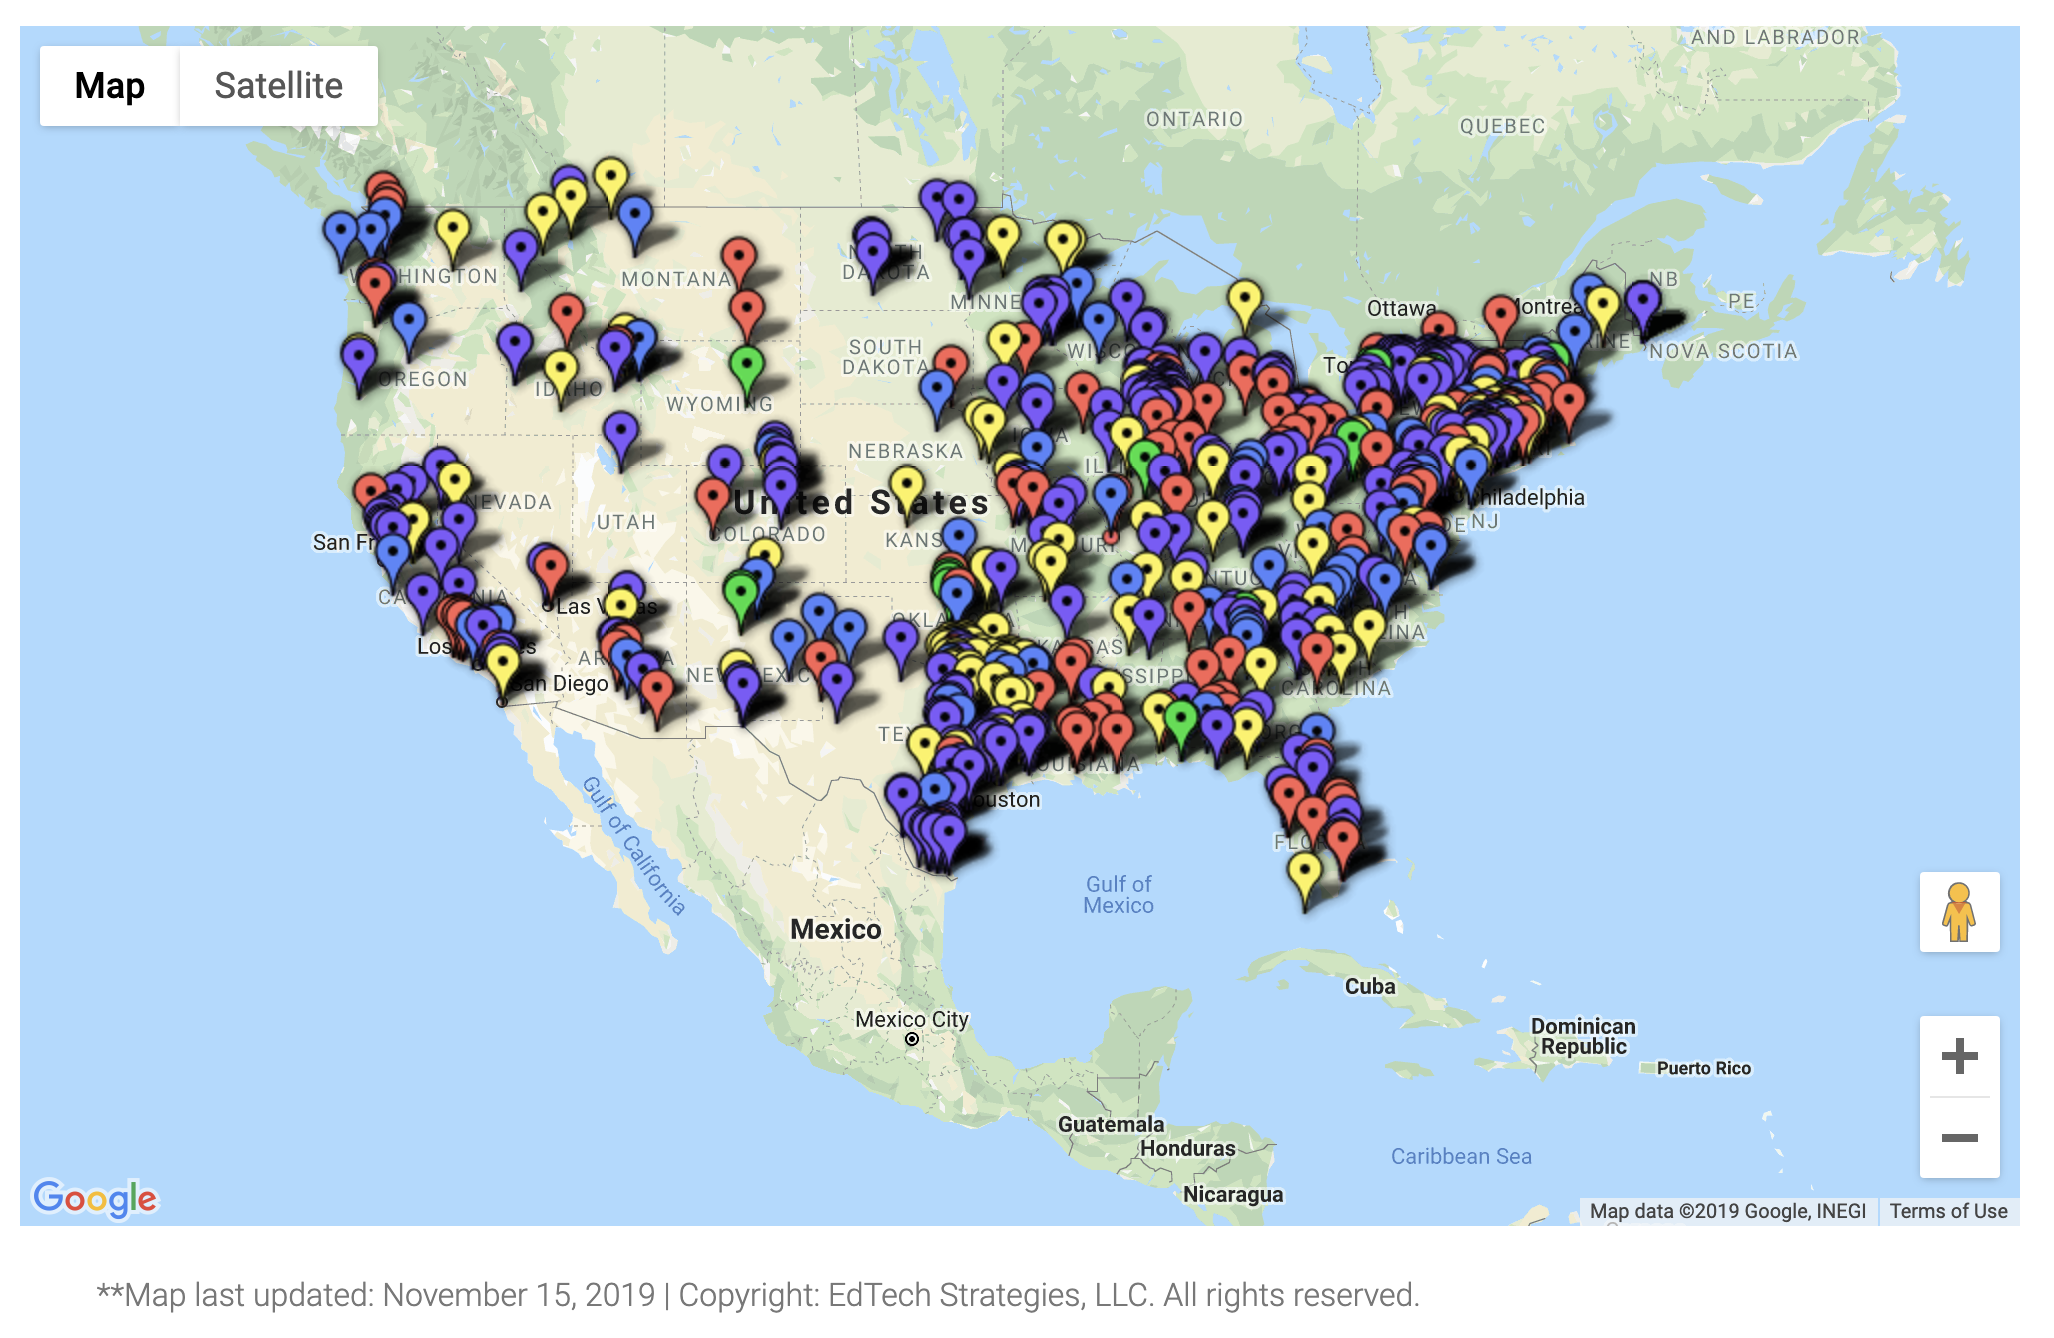 K-12 Cyber Incident Map 